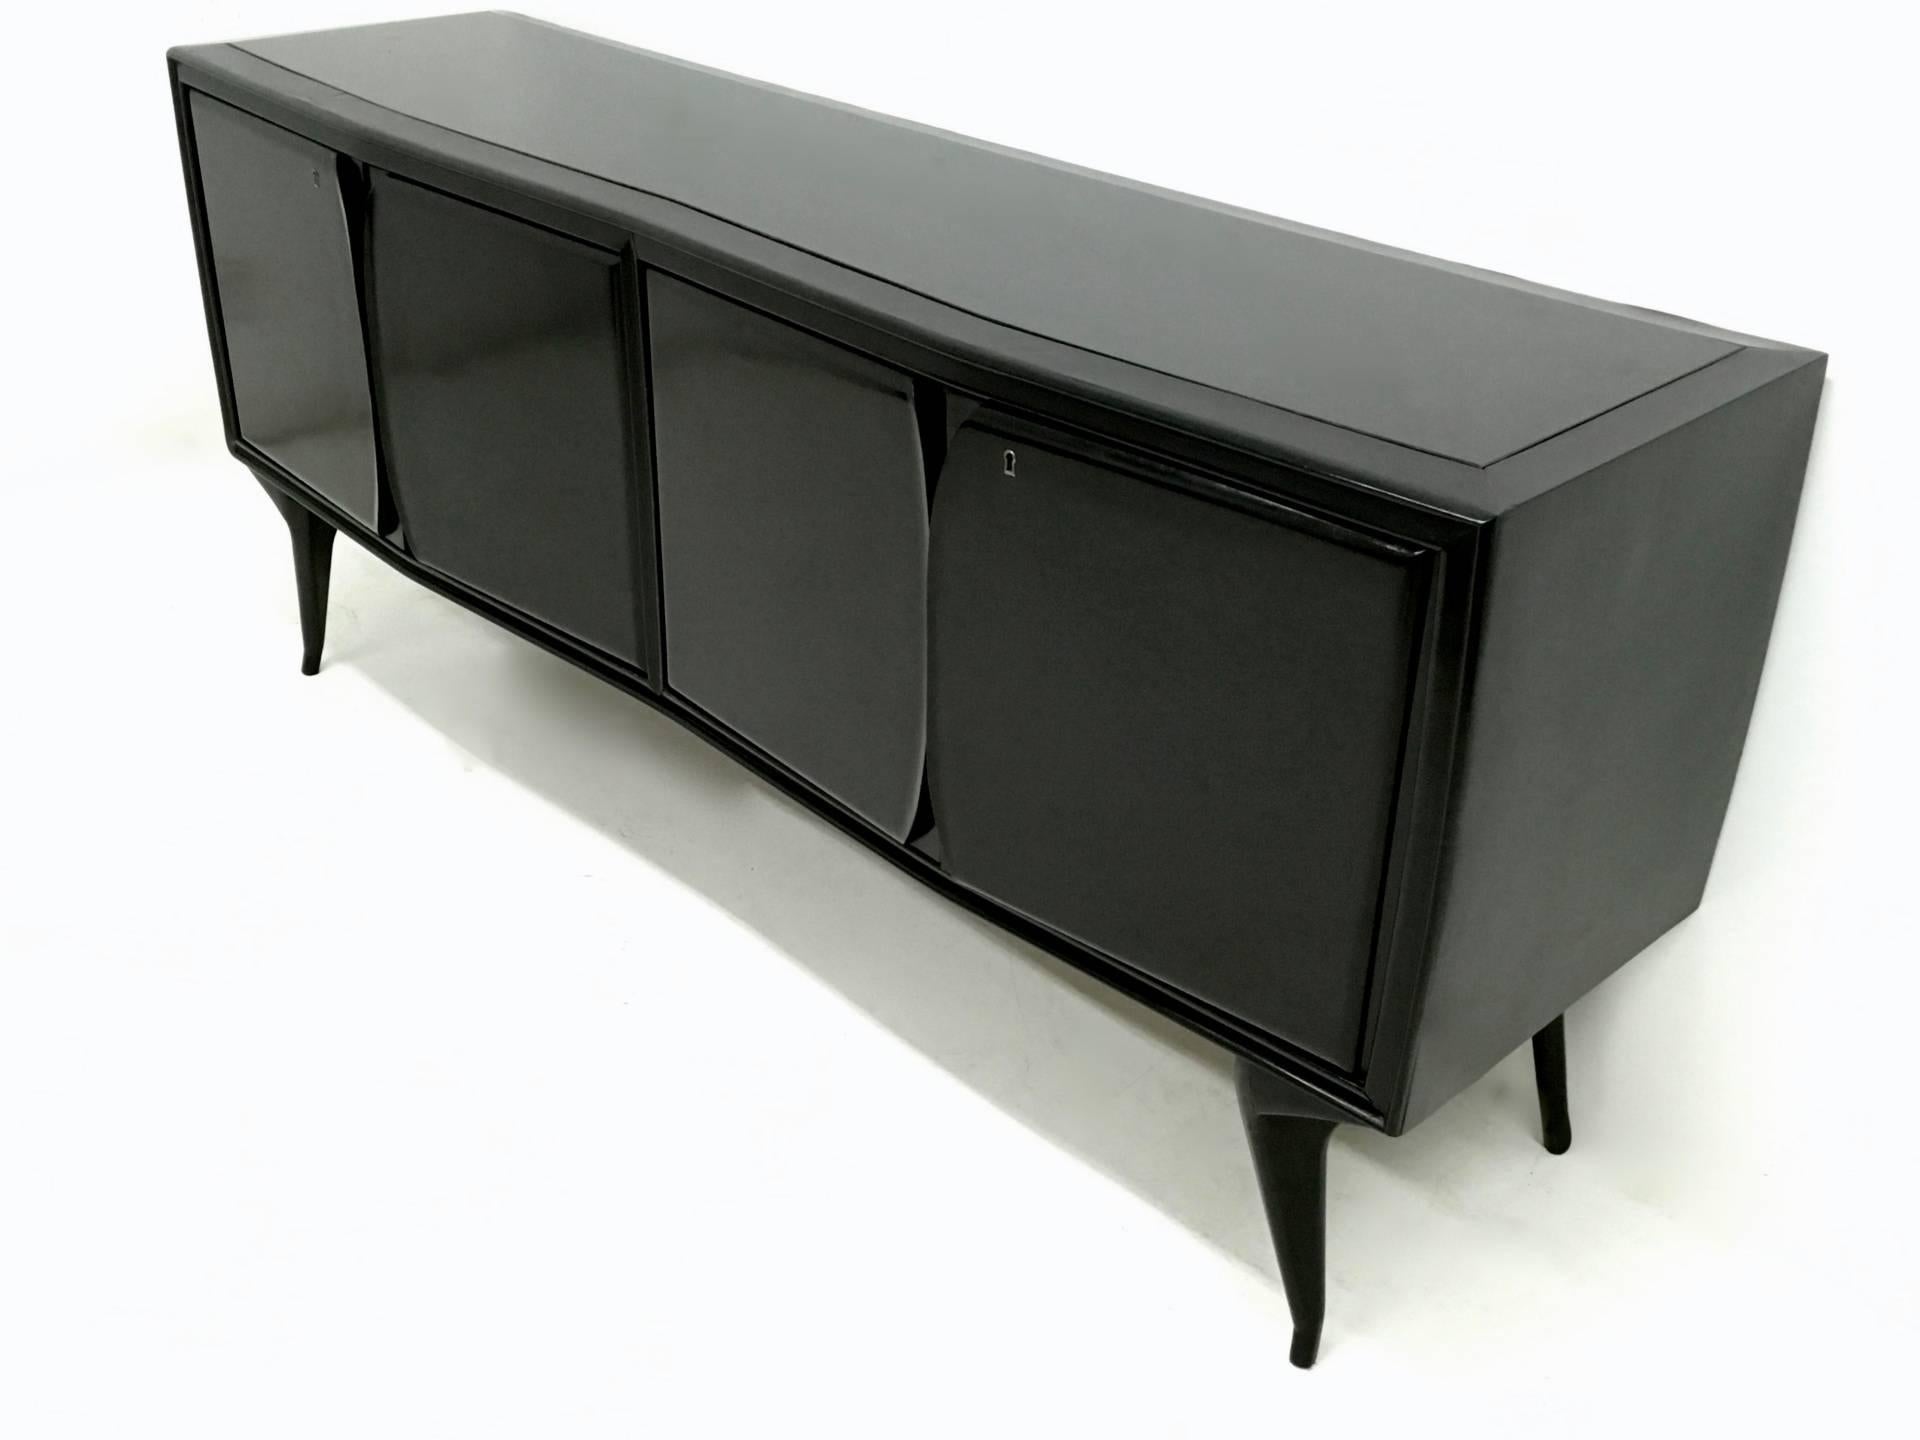 This is a beautiful ebonized wood cabinet.
It is made in formica and features its original opal glass top and sculpted legs in solid wood.
The bar part is made with mirrors, which are decorated with beautiful engraving.
It has been perfectly